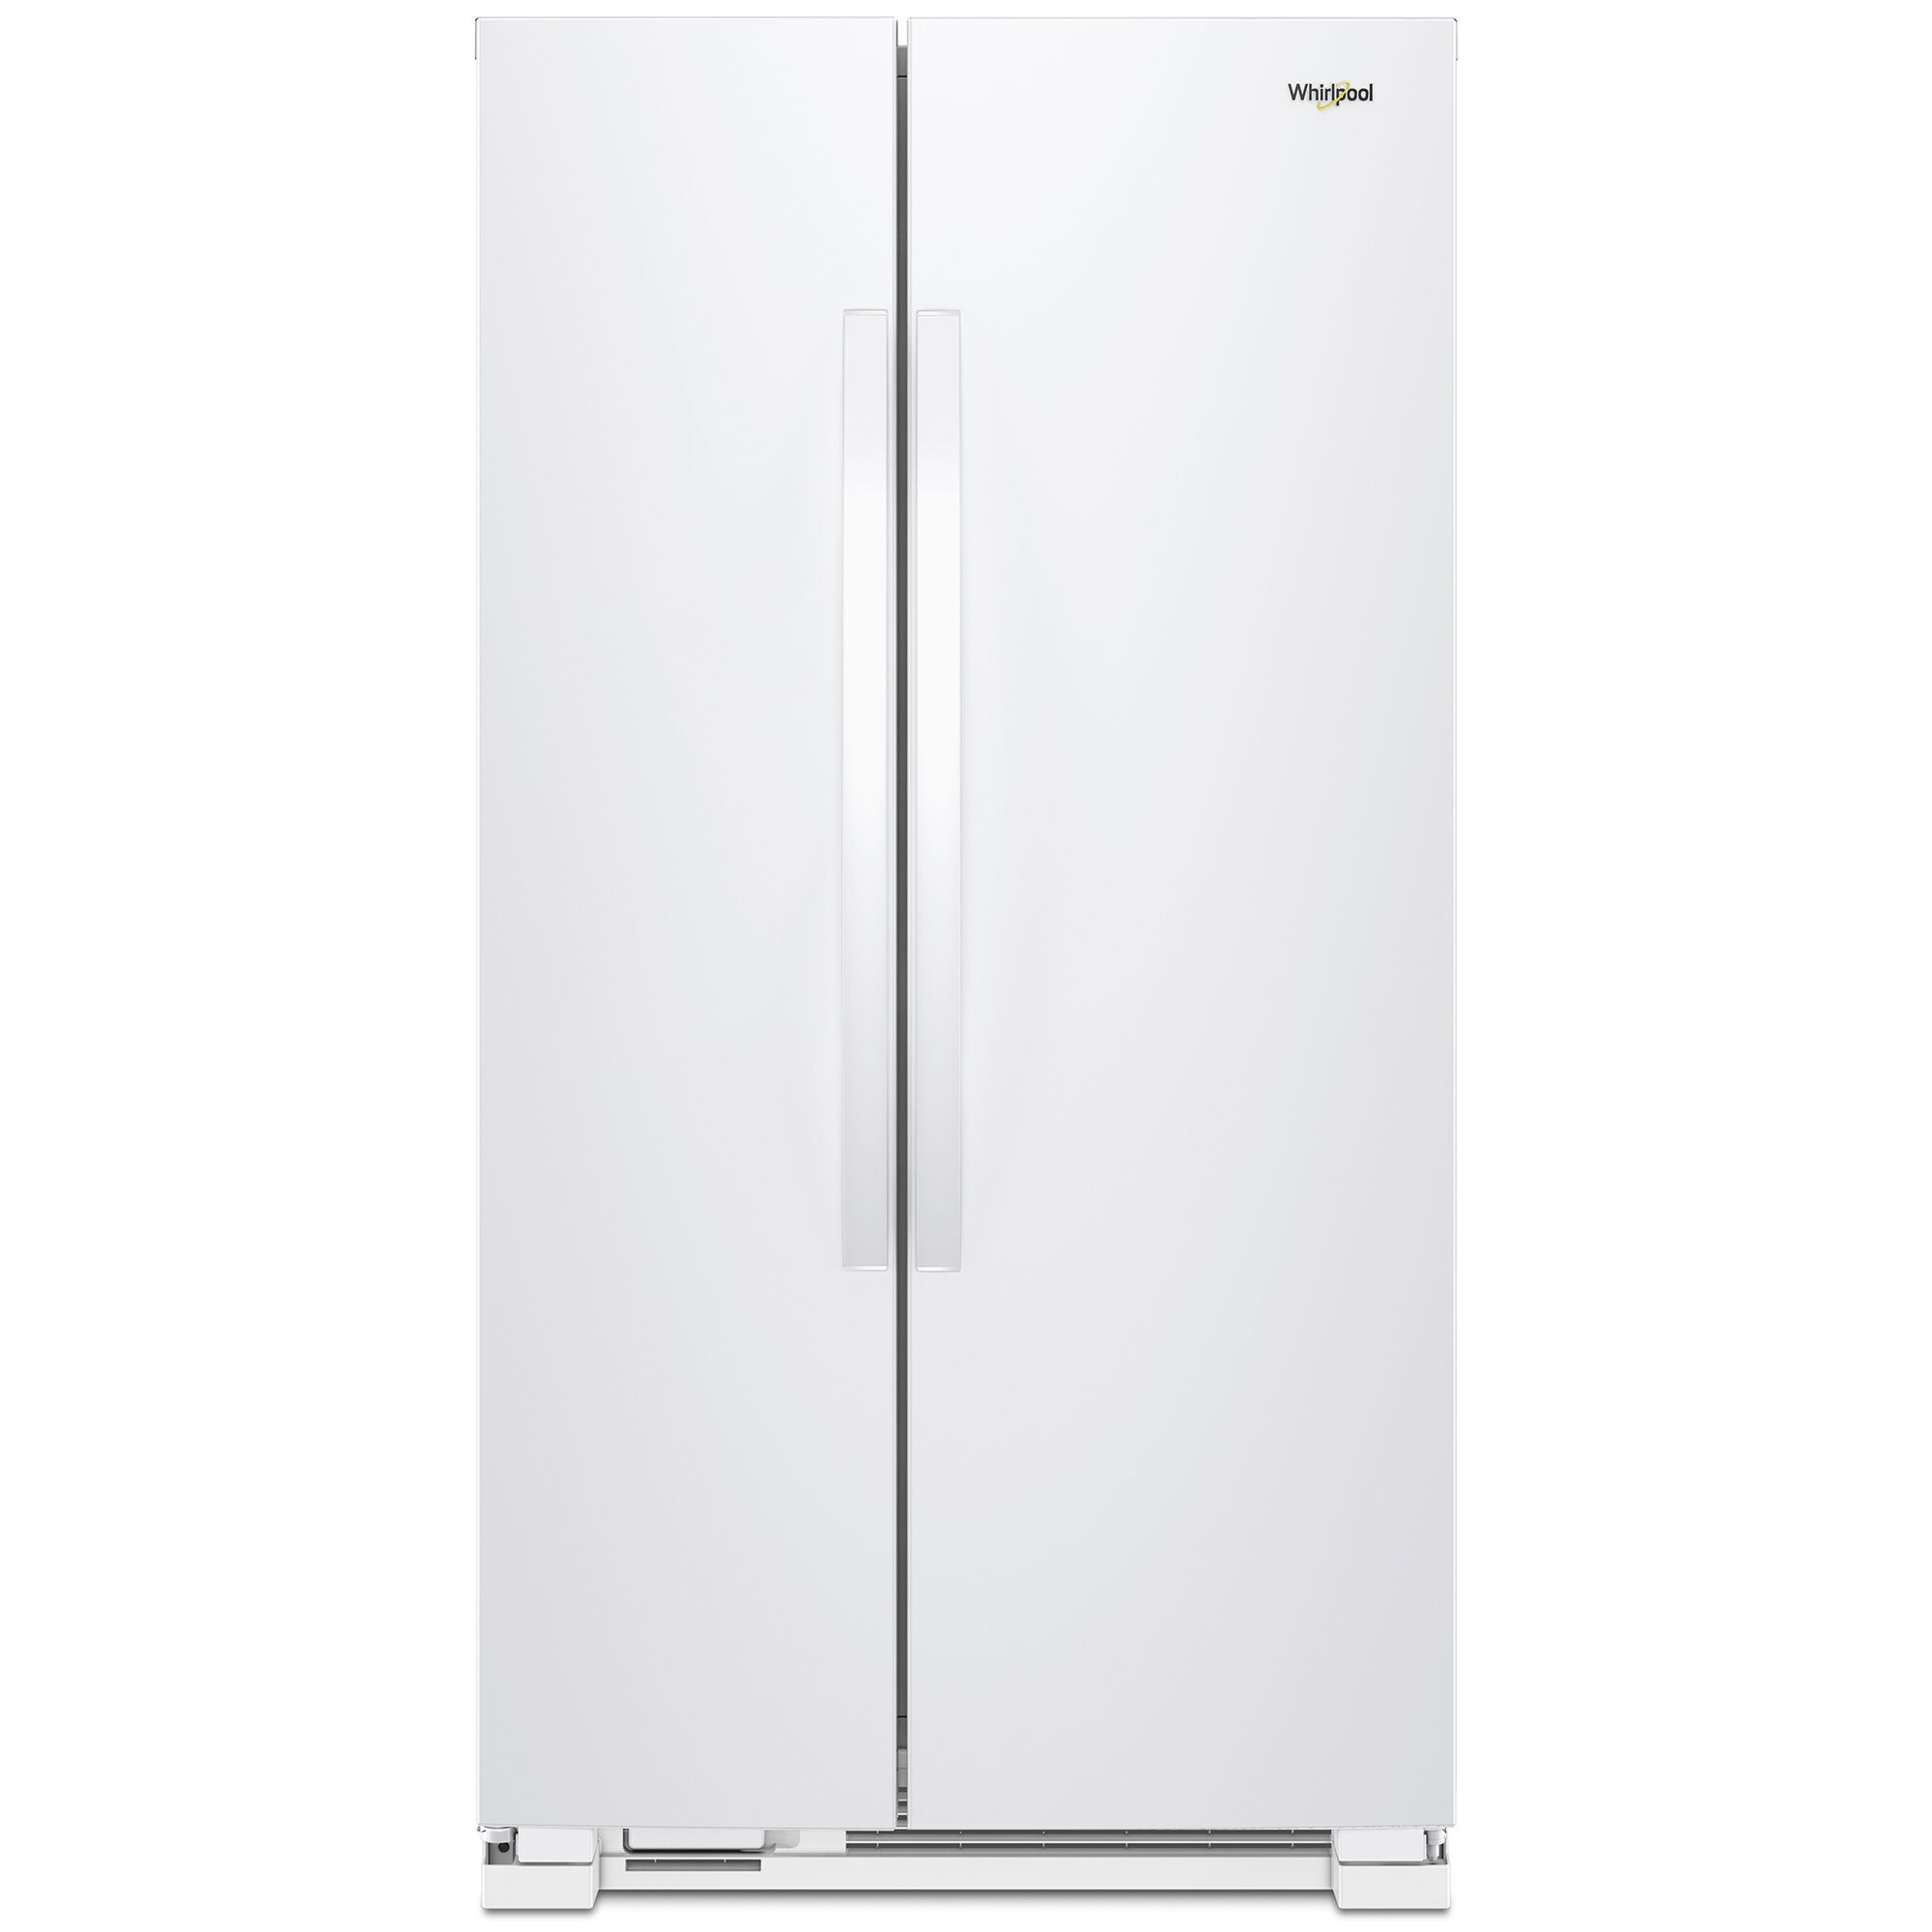 Whirlpool 36 in. 25.1 cu. ft. Side-by-Side Refrigerator - White